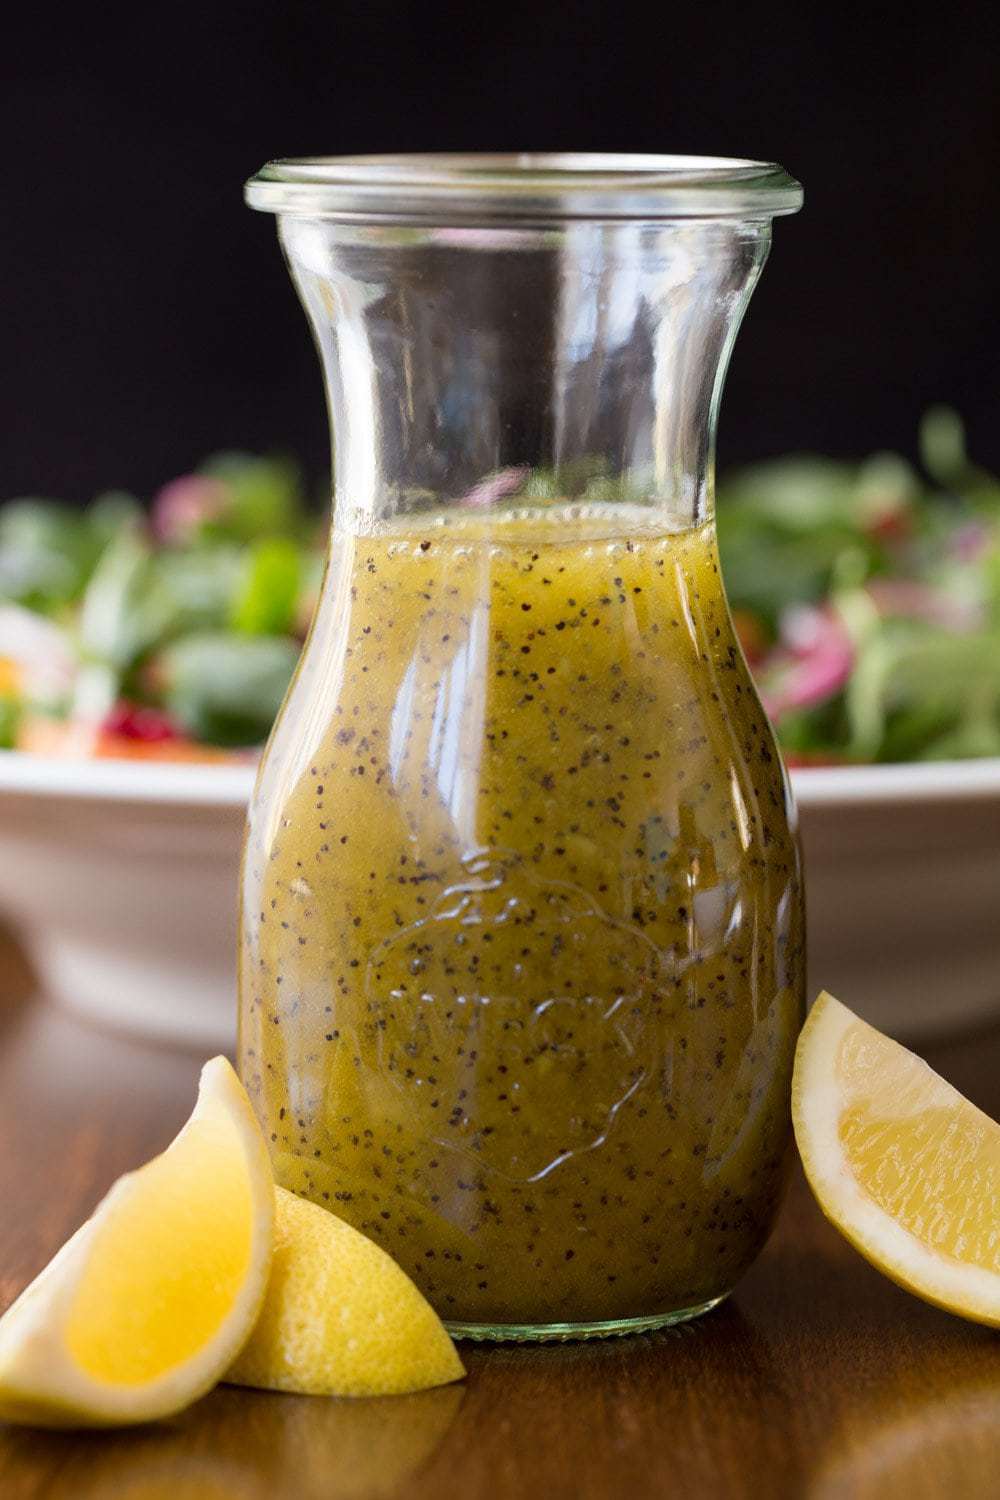 Vertical photo of Lemon Ginger Poppyseed Salad Dressing in a glass cruet with fresh lemon wedges in the foreground and a green salad in the background.